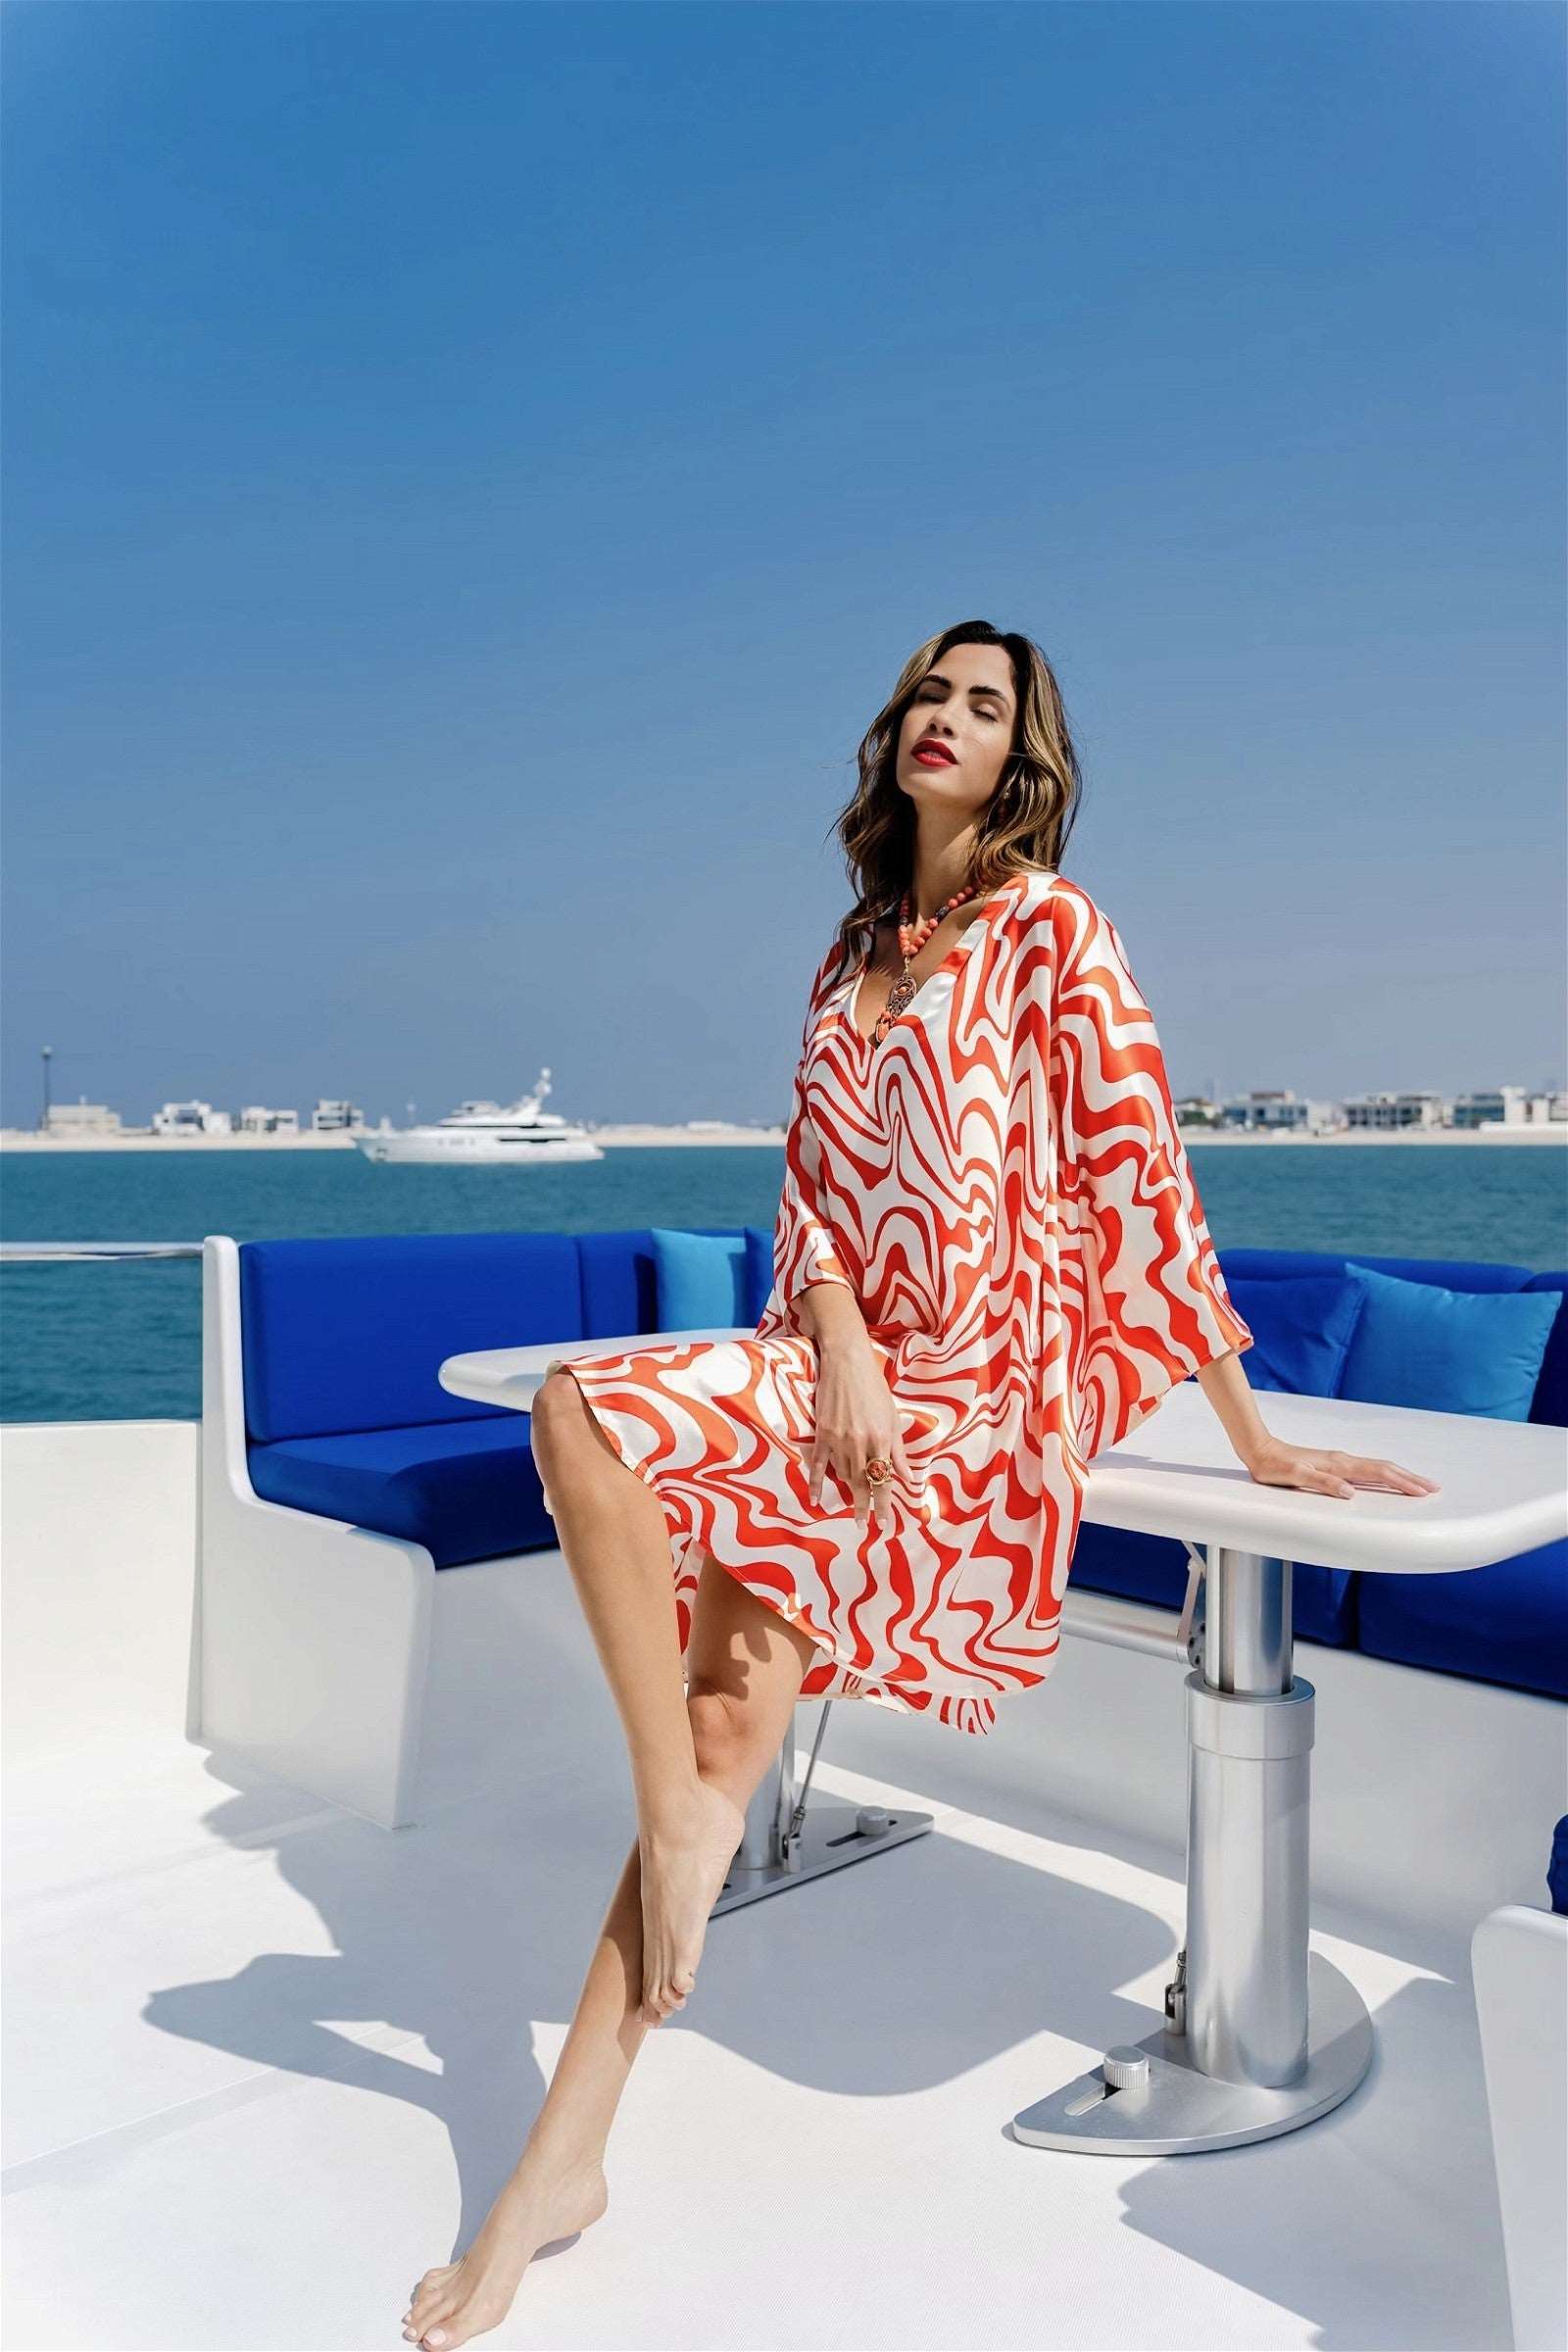 The model in the image is wearing Printed Orange Colour Kaftan In Silk Fabric from Alice Milan. Crafted with the finest materials and impeccable attention to detail, the Kaftan / Dress looks premium, trendy, luxurious and offers unparalleled comfort. It’s a perfect clothing option for loungewear, resort wear, party wear or for an airport look. The woman in the image looks happy, and confident with her style statement putting a happy smile on her face.